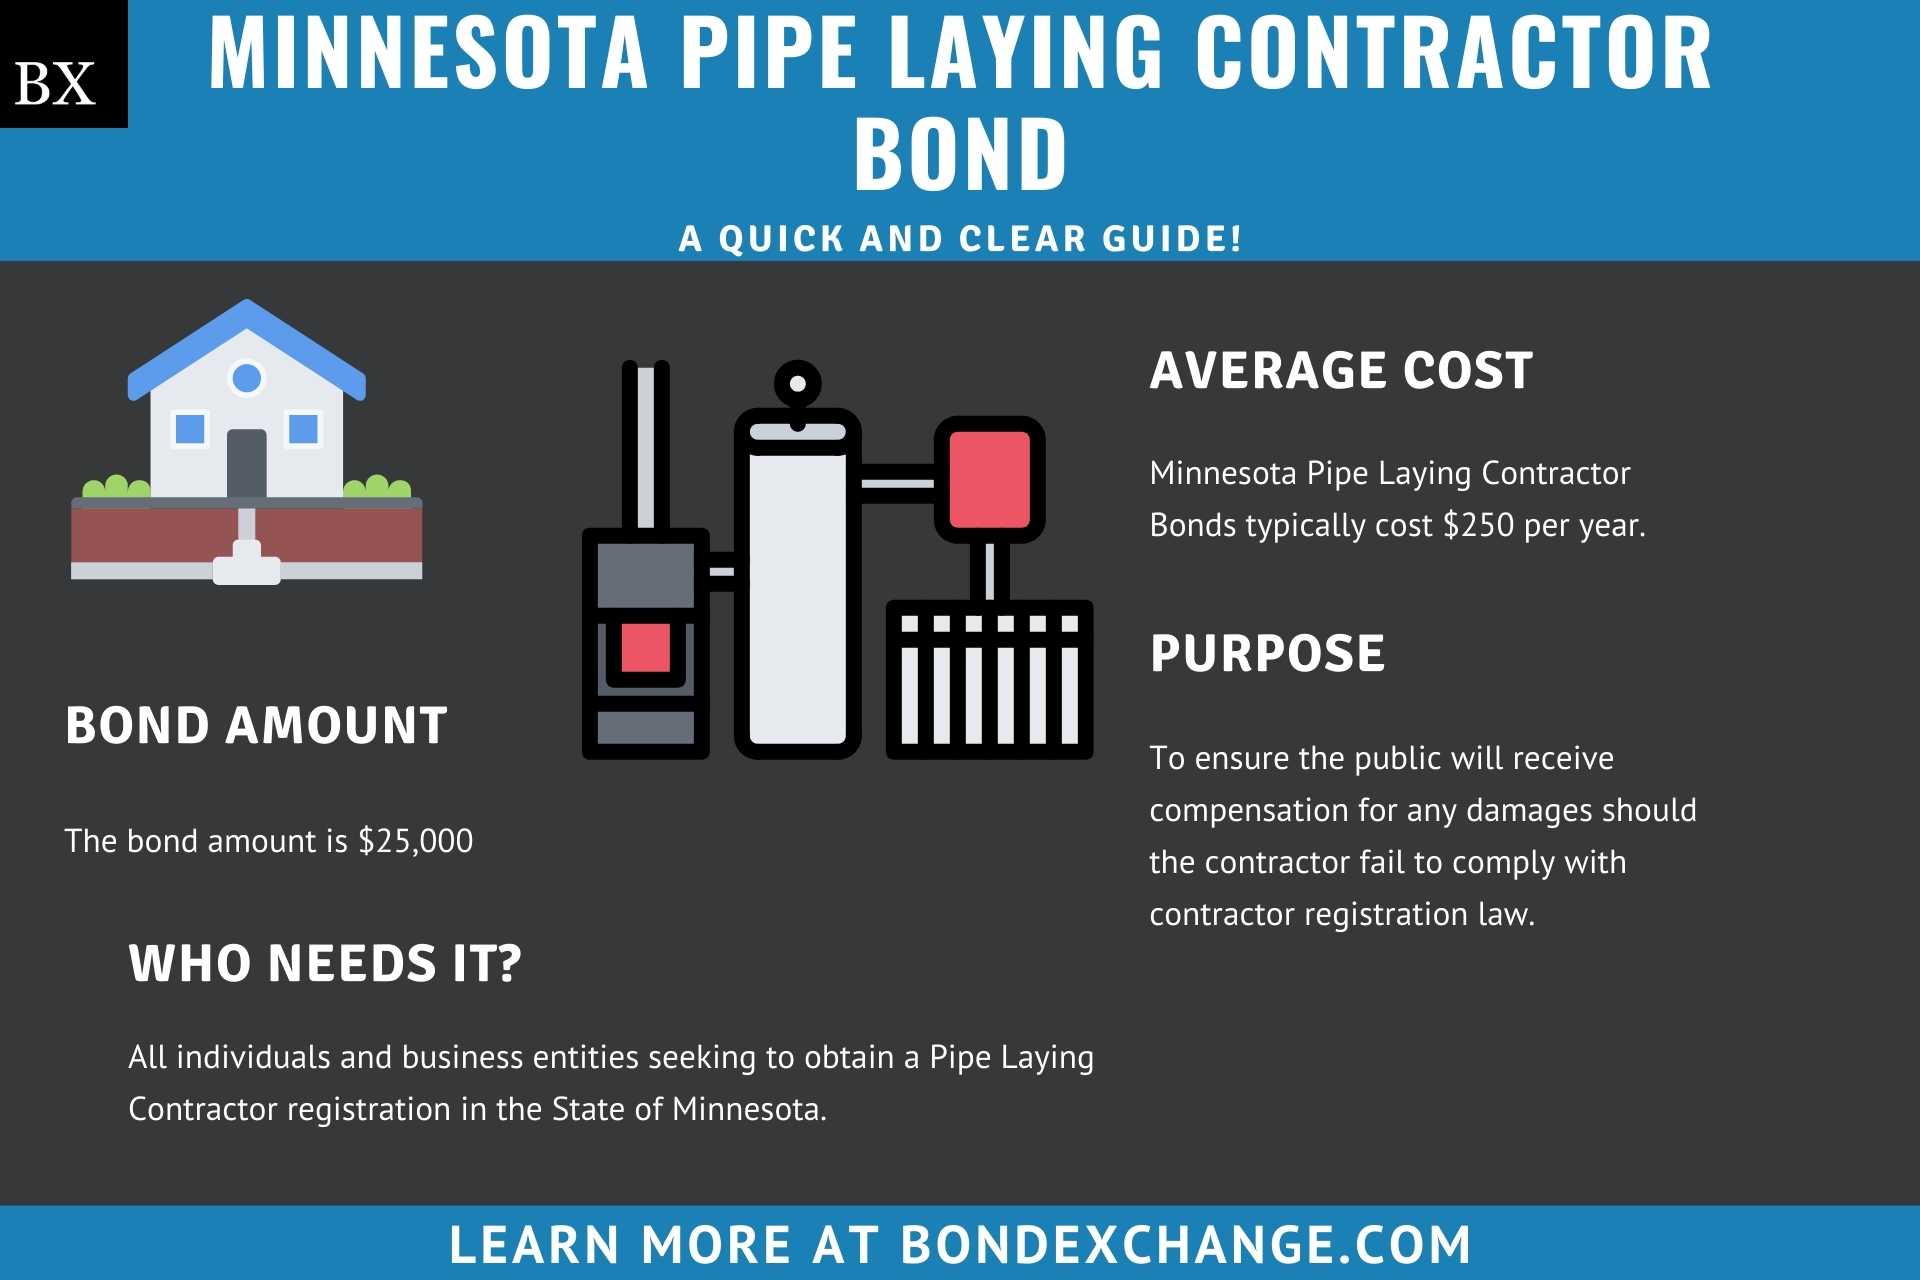 Minnesota Pipe Laying Contractor Bond